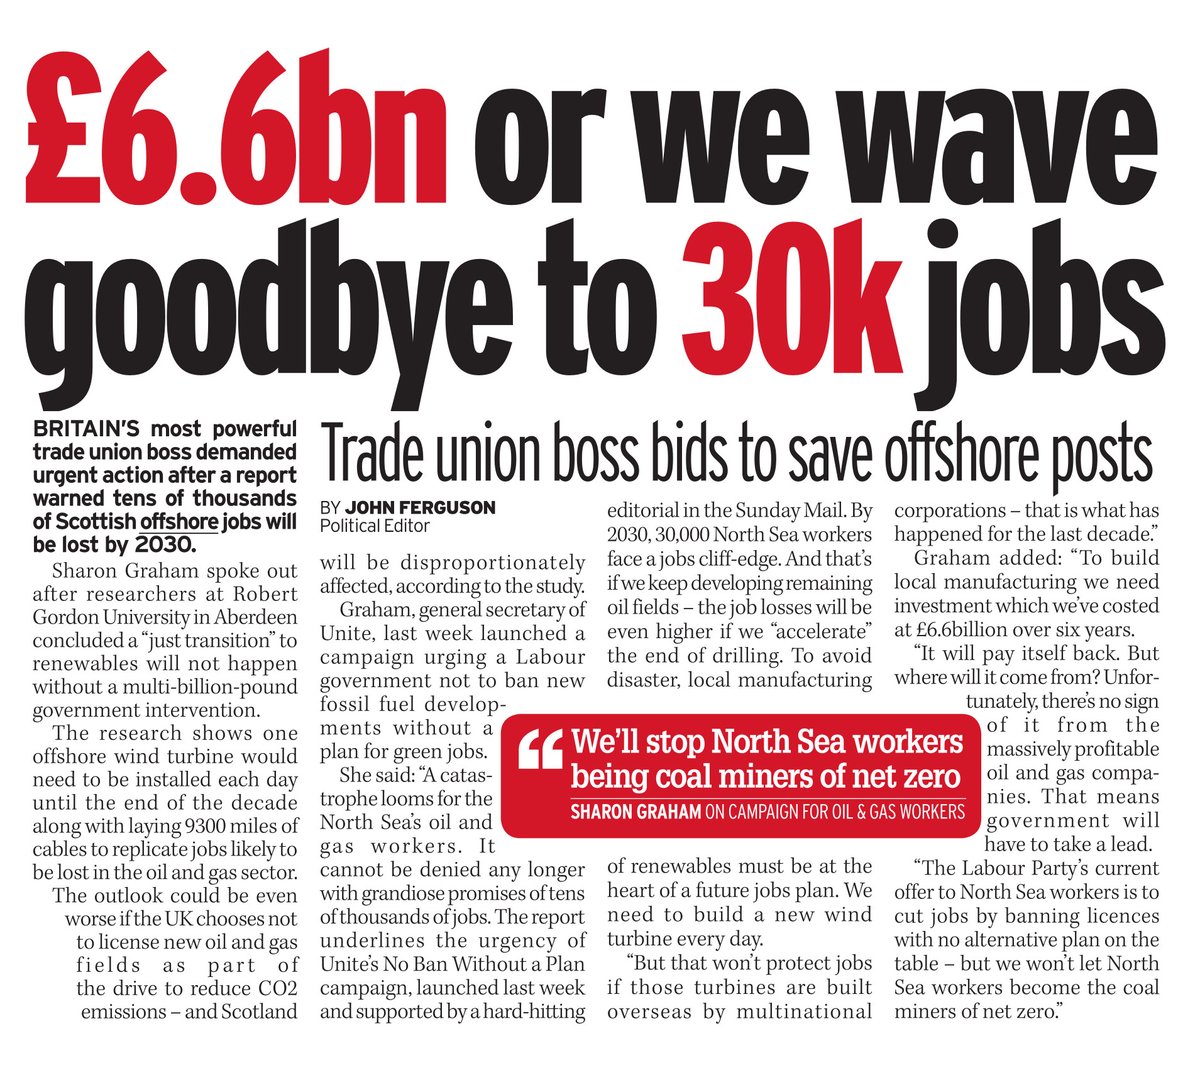 Unite GS is calling for a just transition to renewable energy in the North Sea. Only the Green Party's industrial policy will make sure our coastal communities have well paid, unionised jobs as well as protecting our coasts from violent storms and sea erosion.